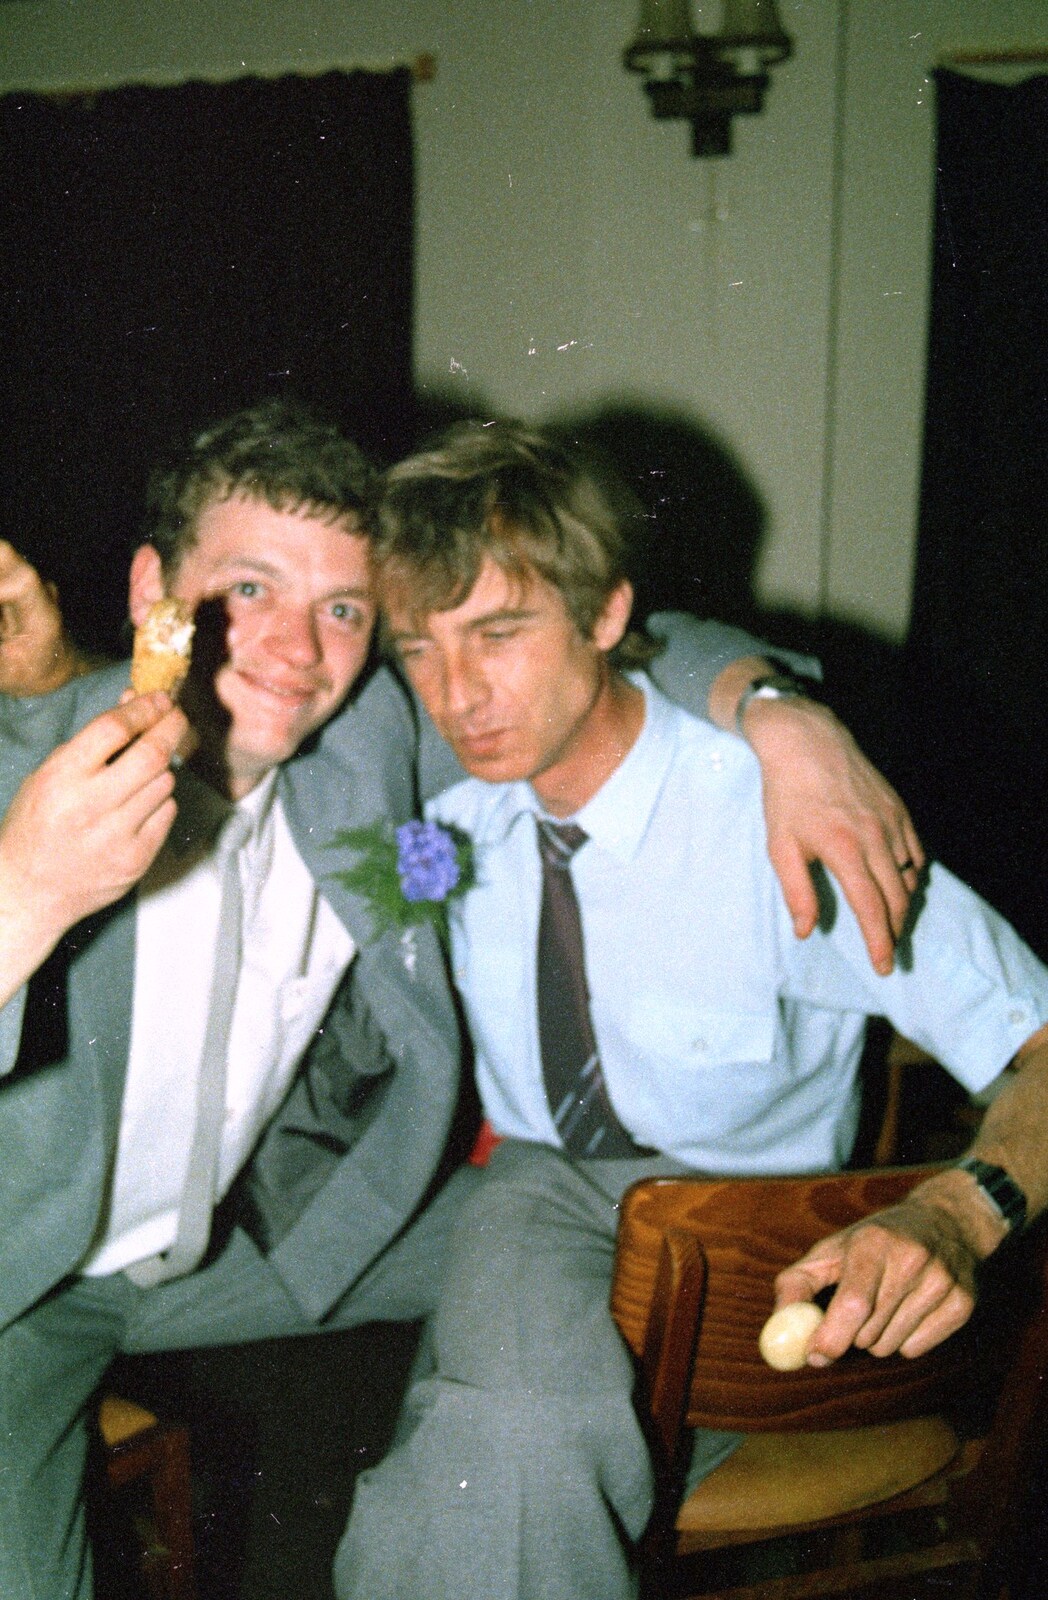 Julian waves a chicken leg around from A CB Wedding and a Derelict Railway, Hampshire - 20th July 1986